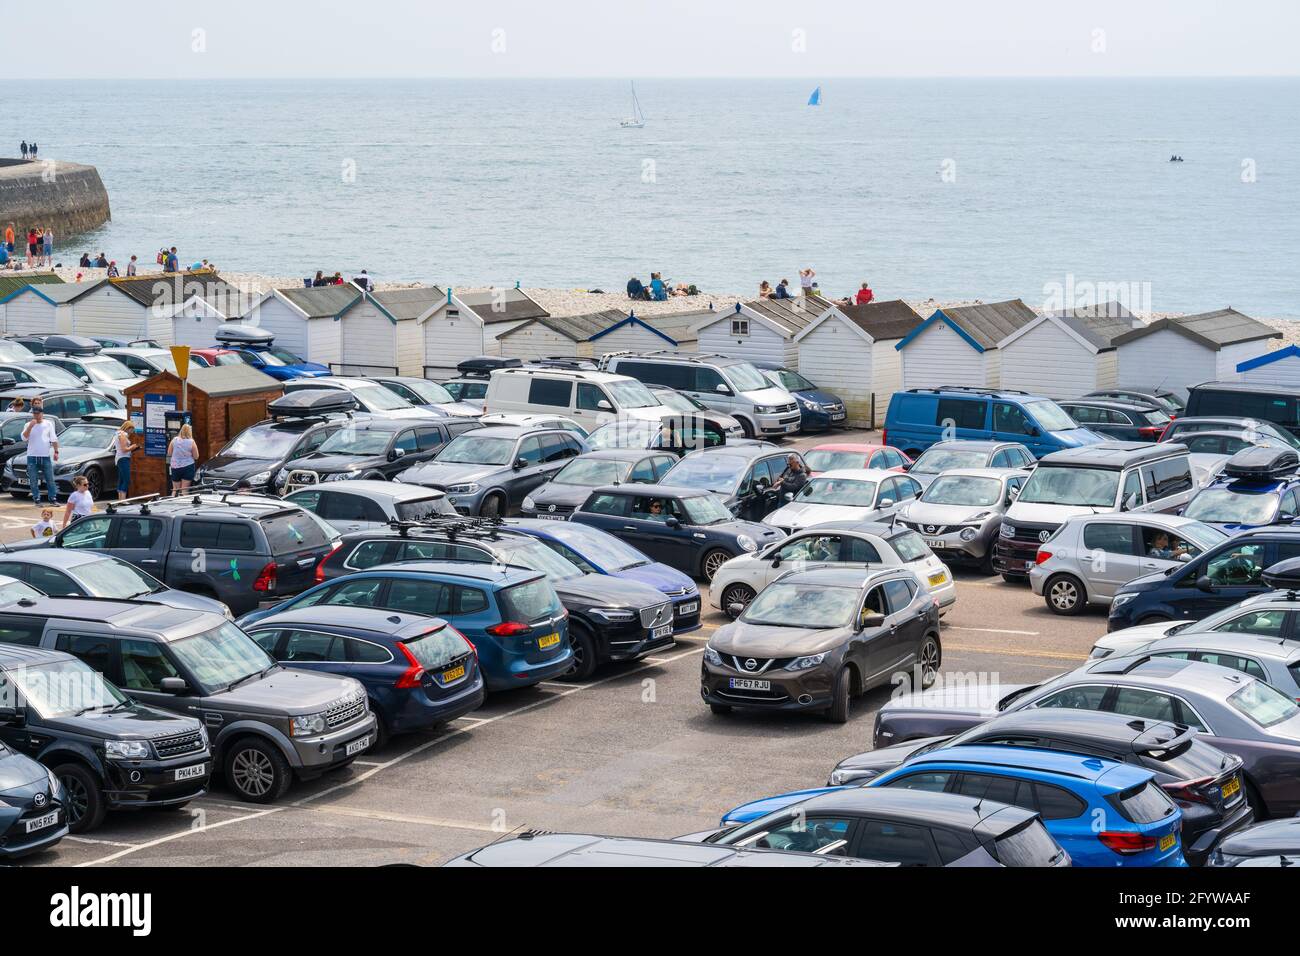 Lyme Regis, Dorset, UK. 30th May, 2021. UK Weather. Cars queued for a space in the packed Monmouth Beach car park at the seaside resort of Lyme Regis on the bank holiday weekend as people flocked to the beach to enjoy scorching hot sunsine as the heatwave continues. Credit: Celia McMahon/Alamy Live News Stock Photo